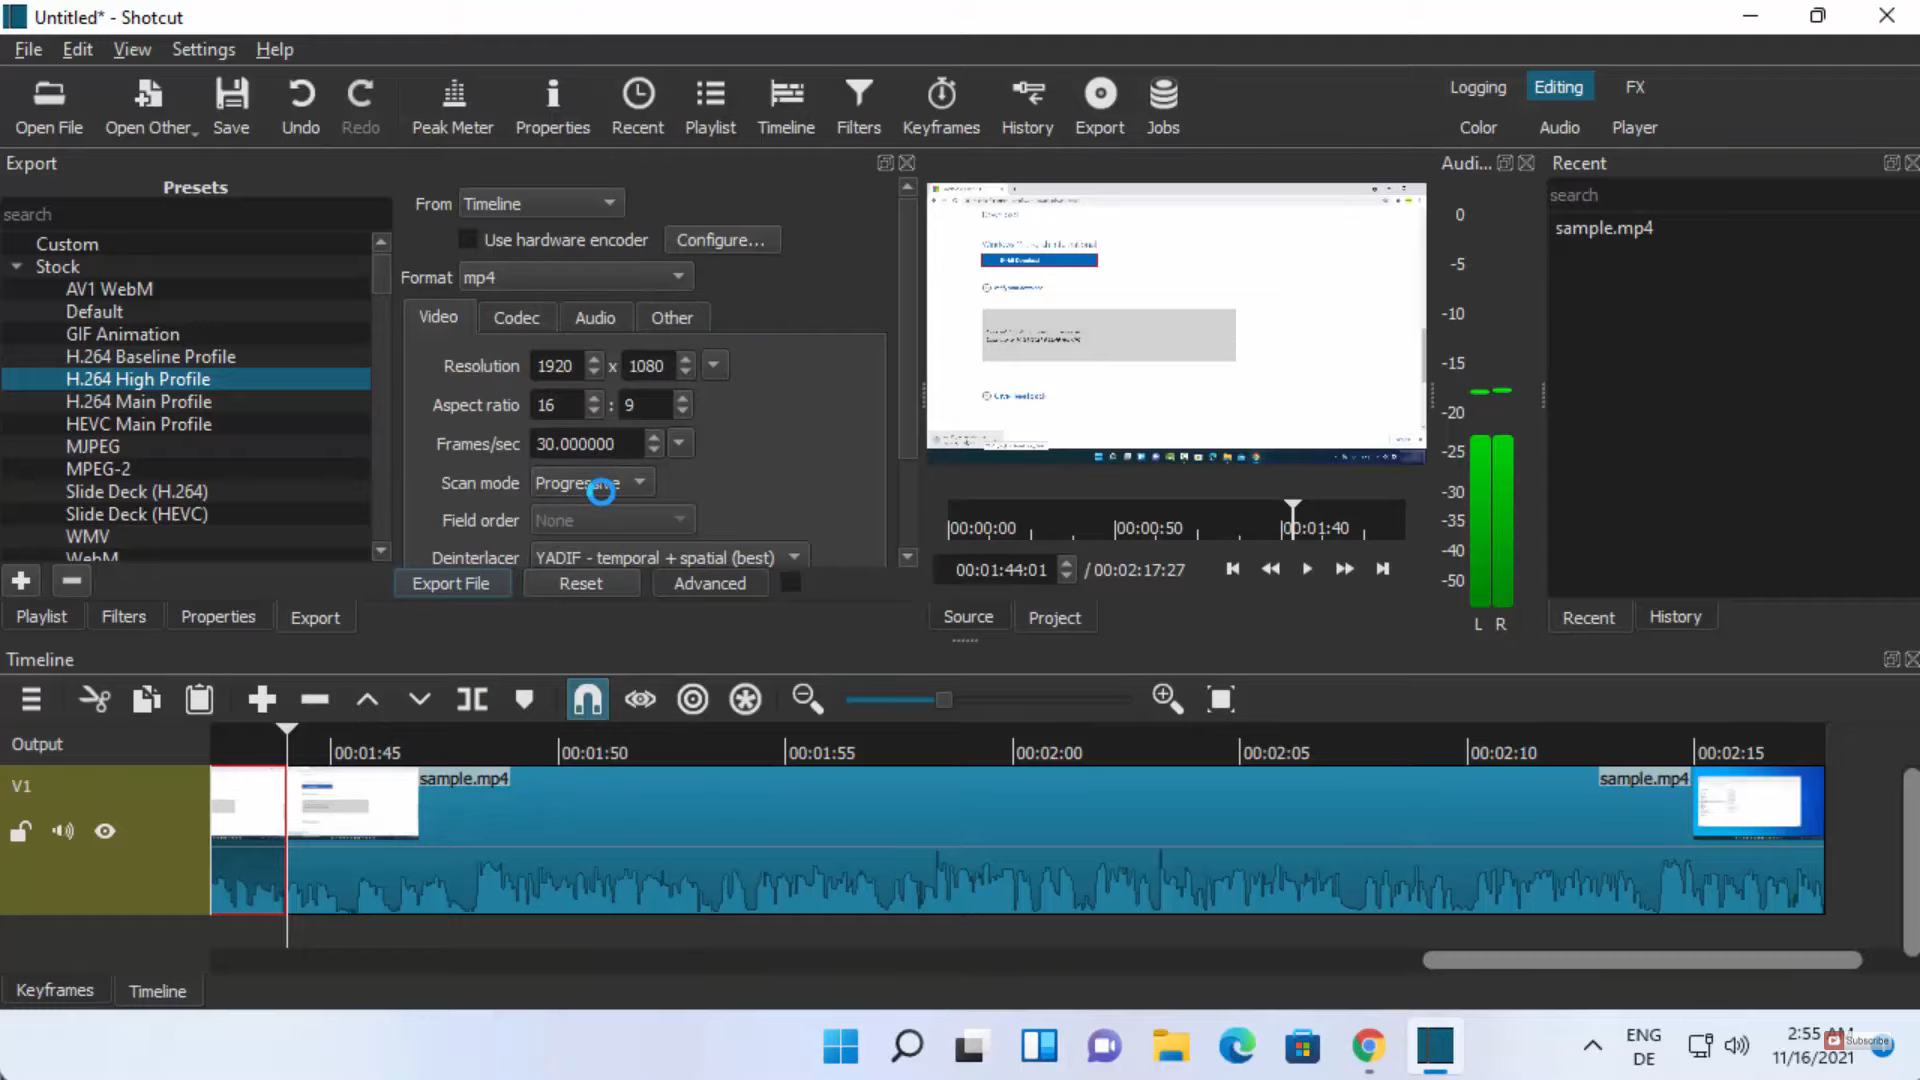 How to Install Shotcut Video Editor on Windows 11